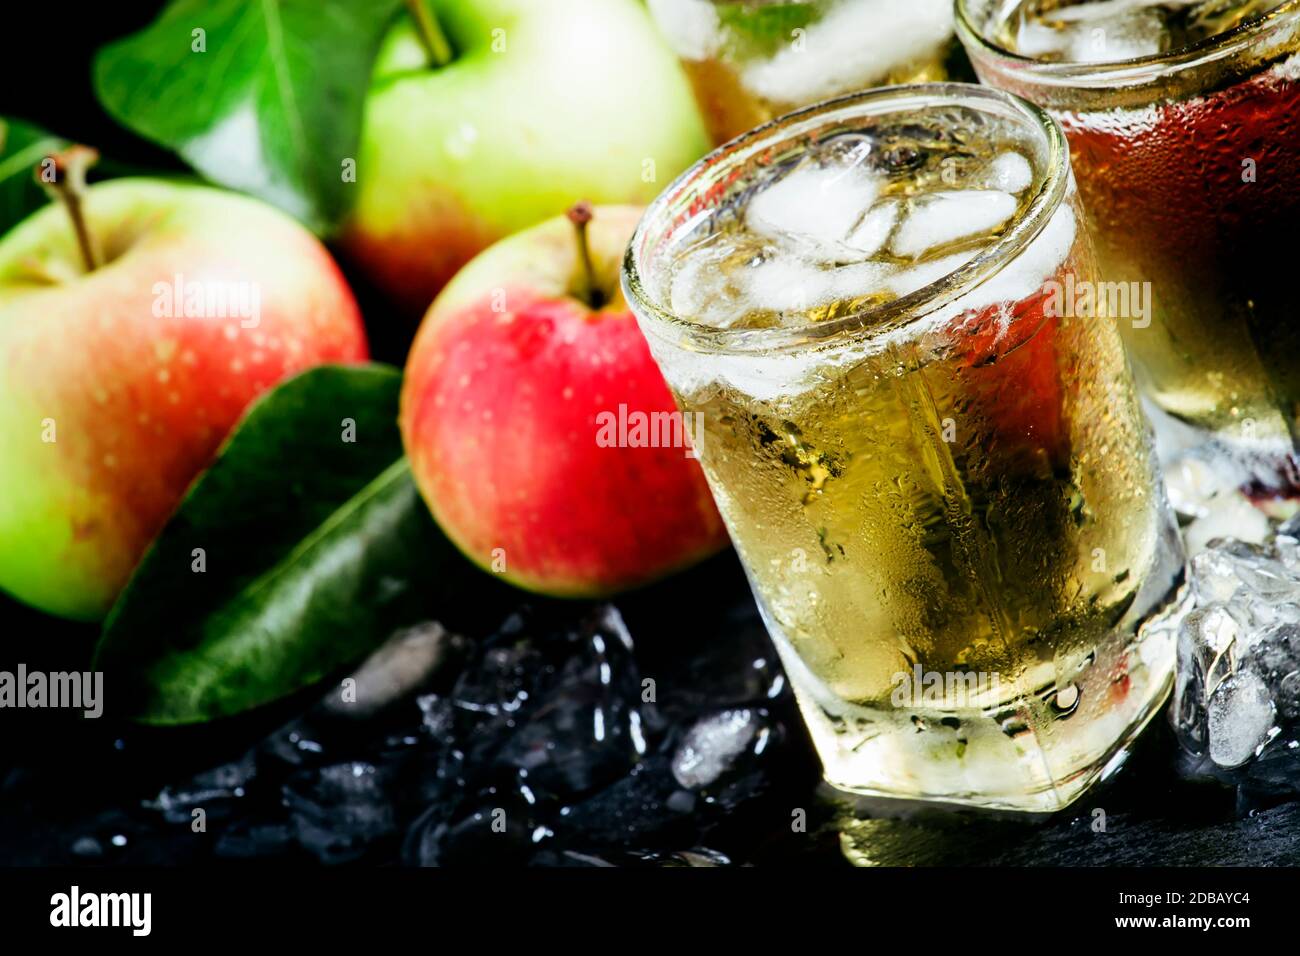 Cold apple juice with crushed ice, fresh apples with green leaves on a dark background, selective focus Stock Photo